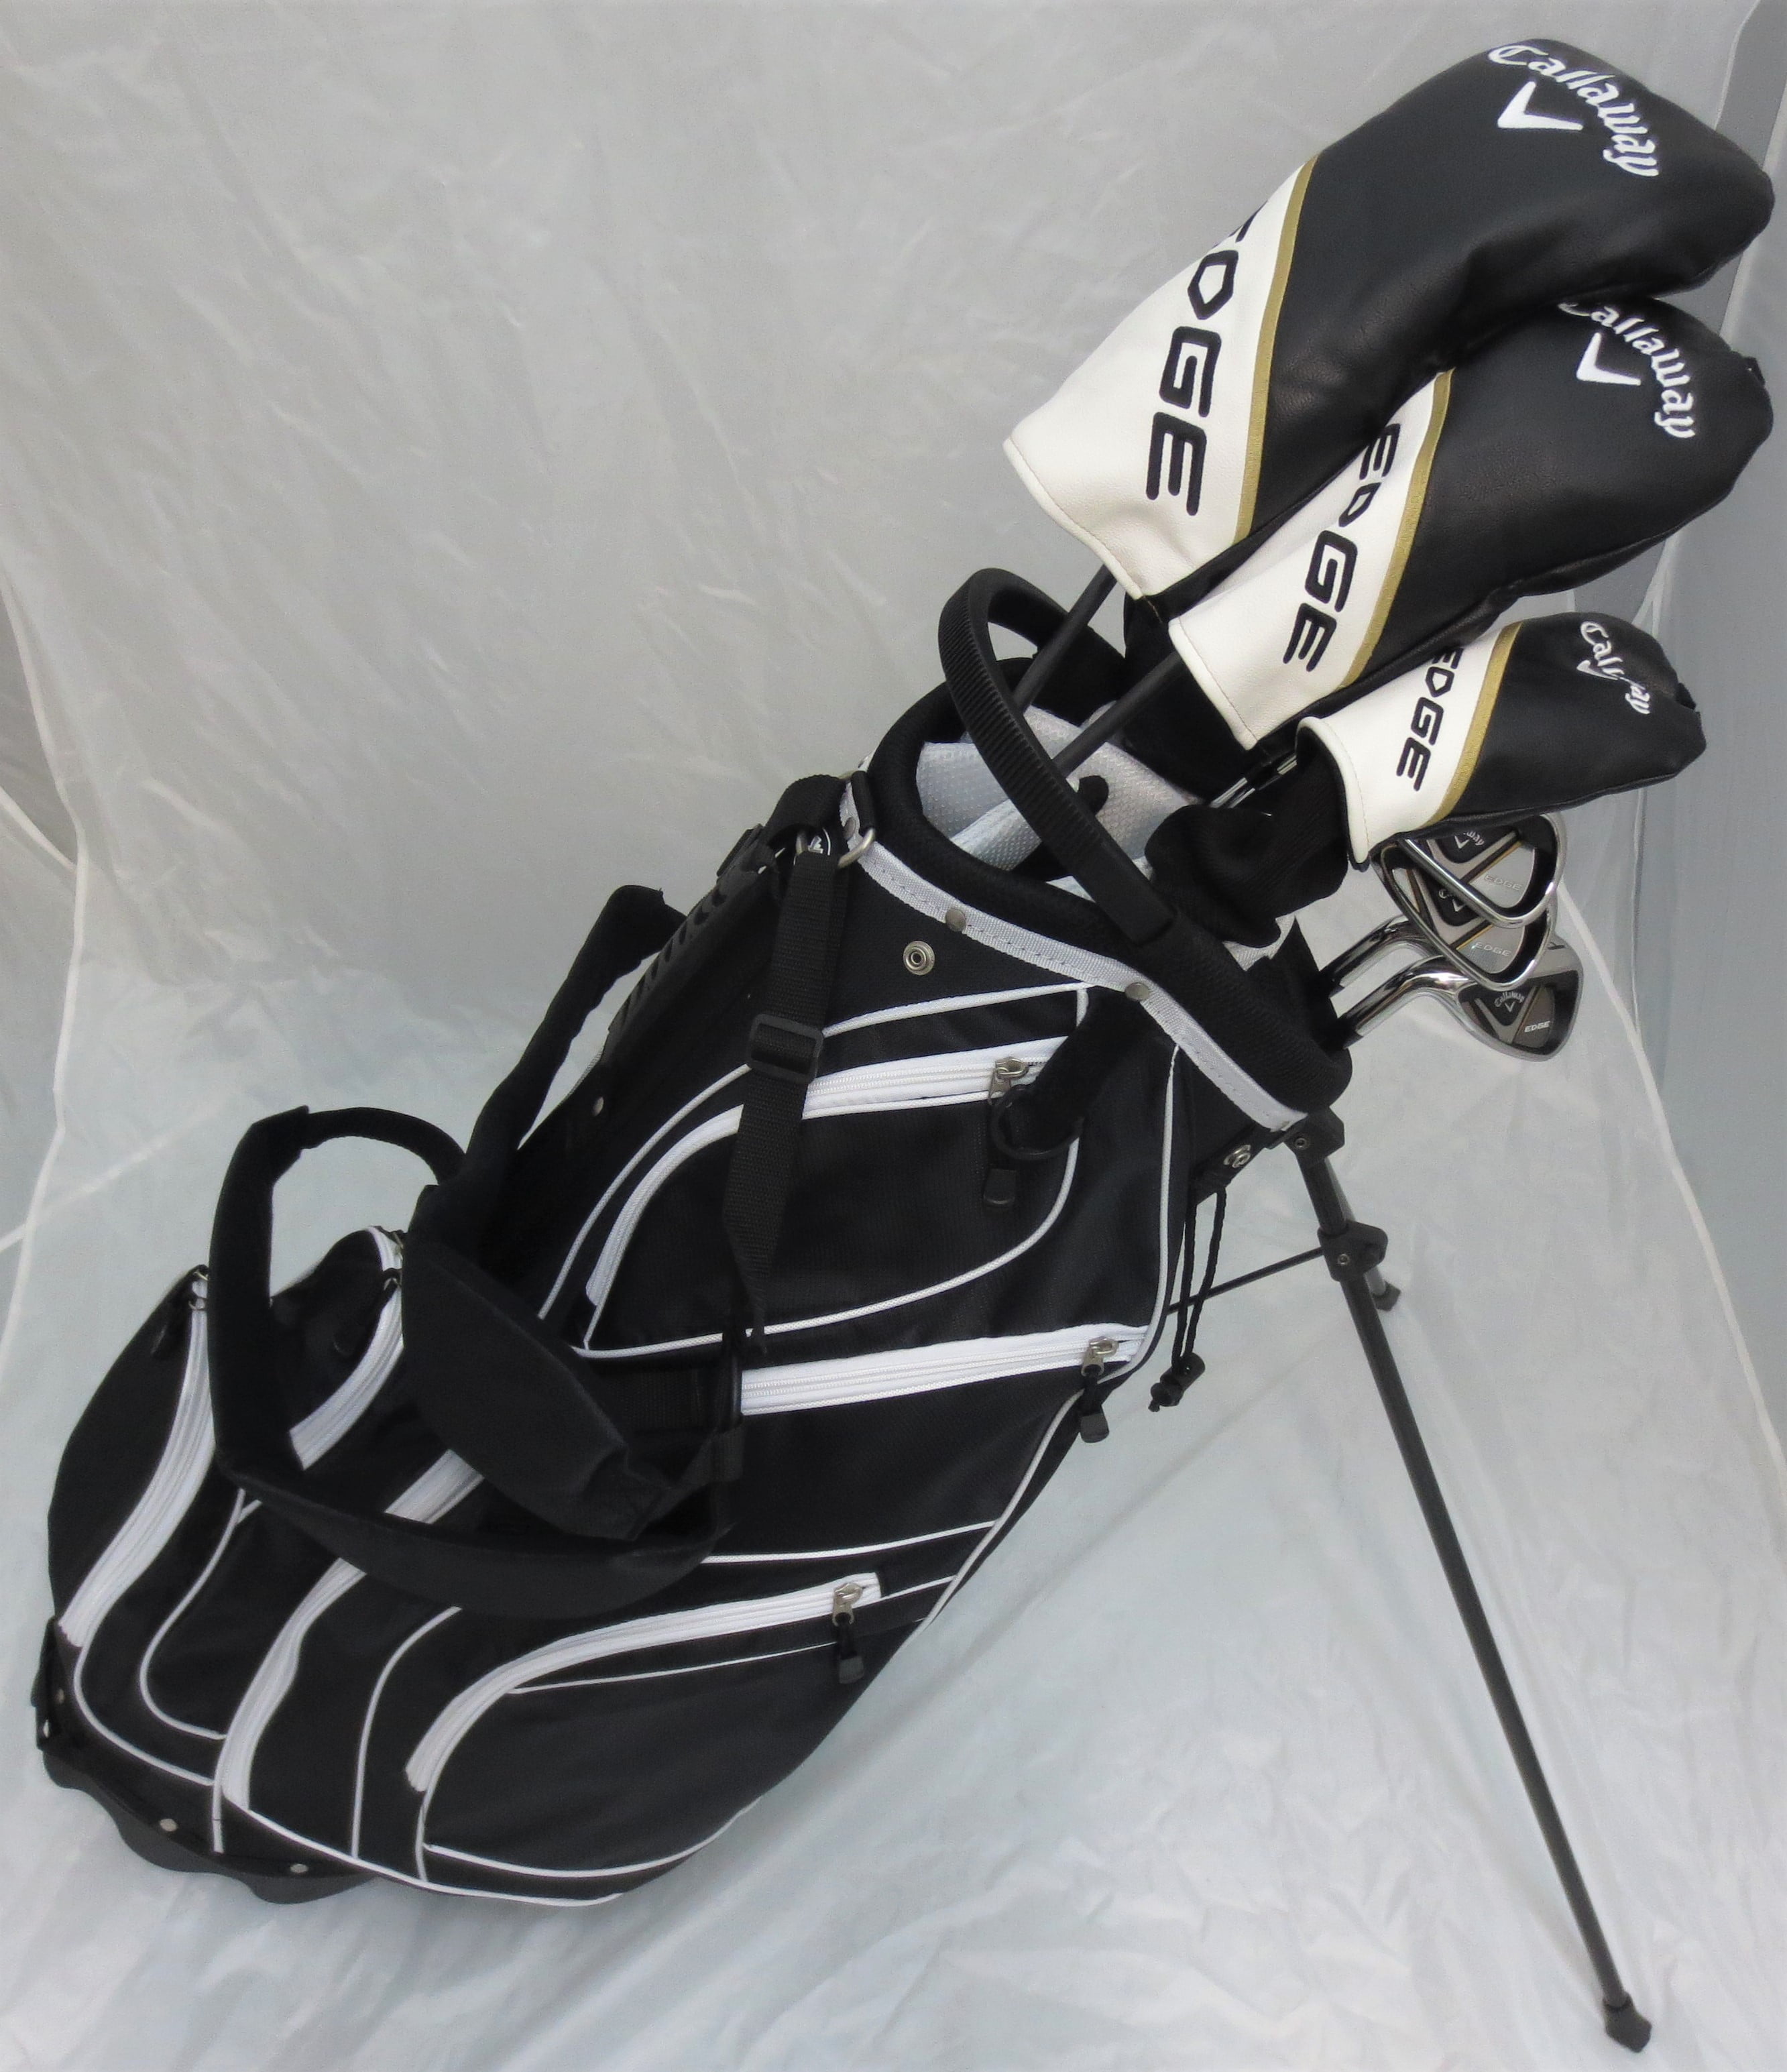 Callaway, Mens Left Hand Golf Set Complete Driver, Fairway Wood, Hybrid, Irons, Putter, Clubs and Stand Bag